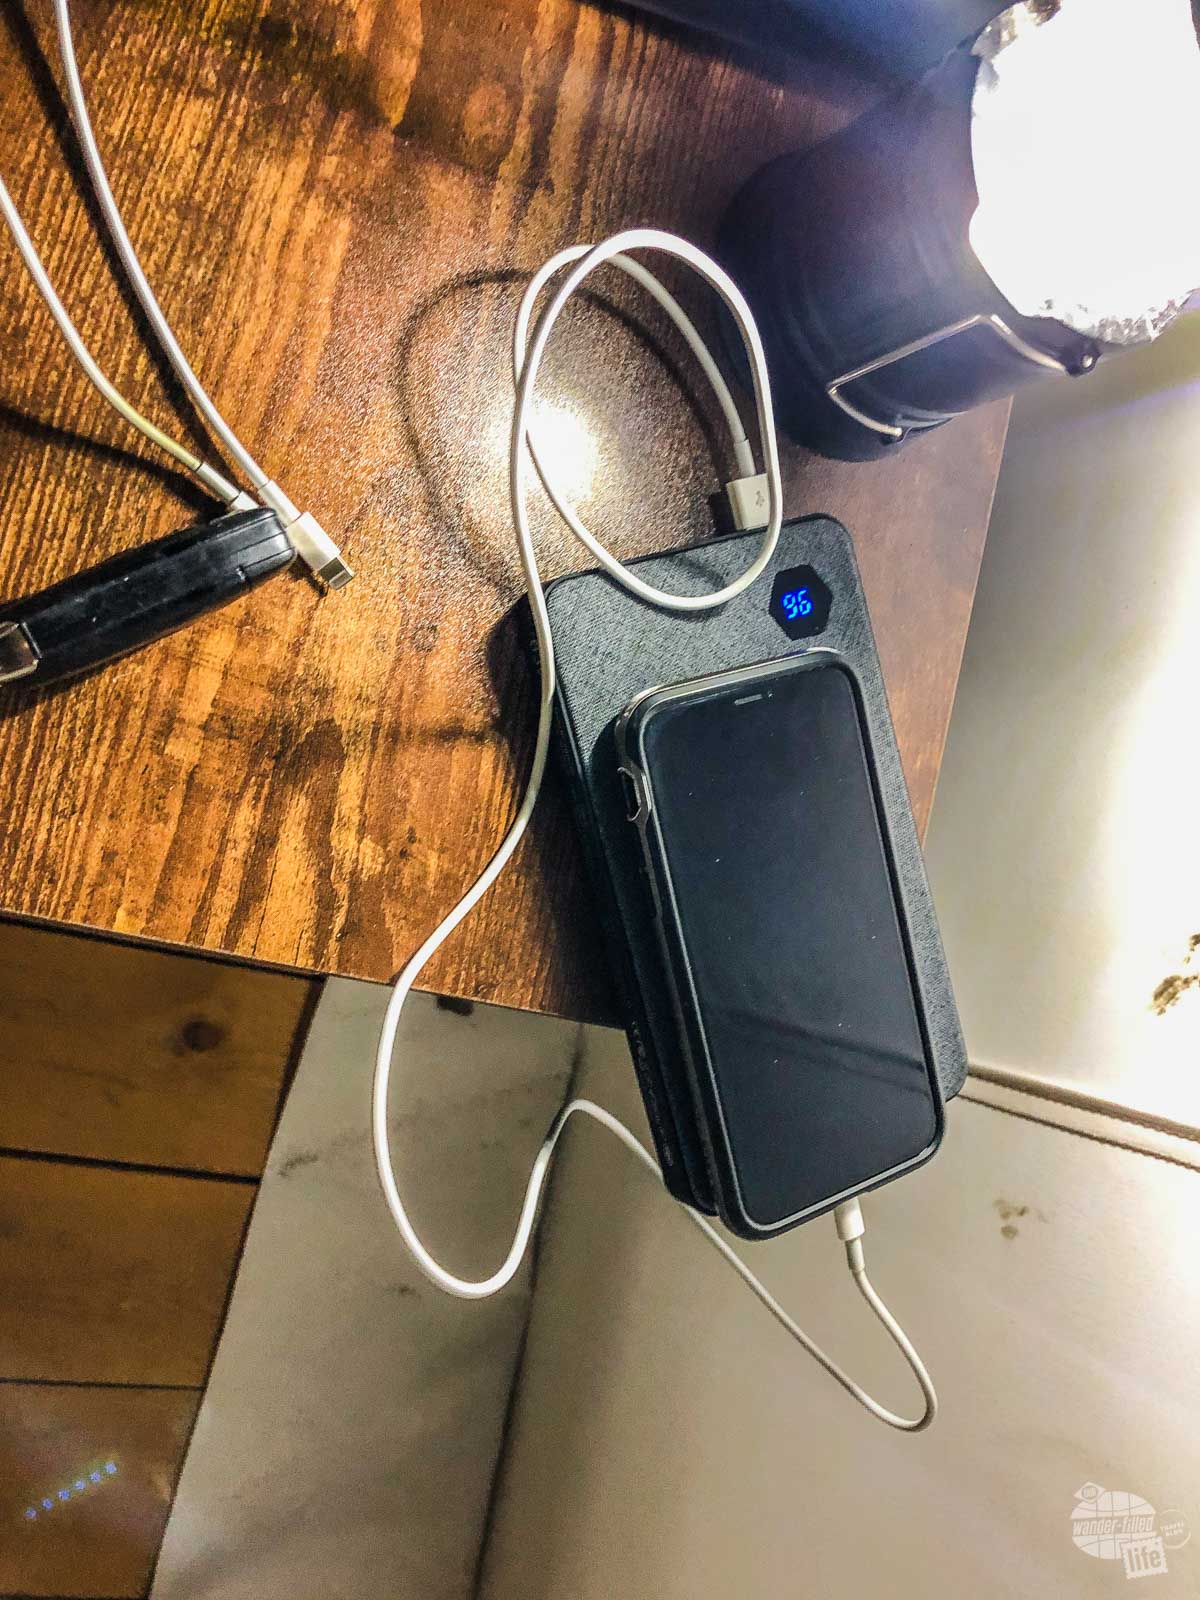 The Eggtronic Laptop Power Bank charging my iPhone. Note the percentage indicator at the top right that lets you know how much charge the device has on it.